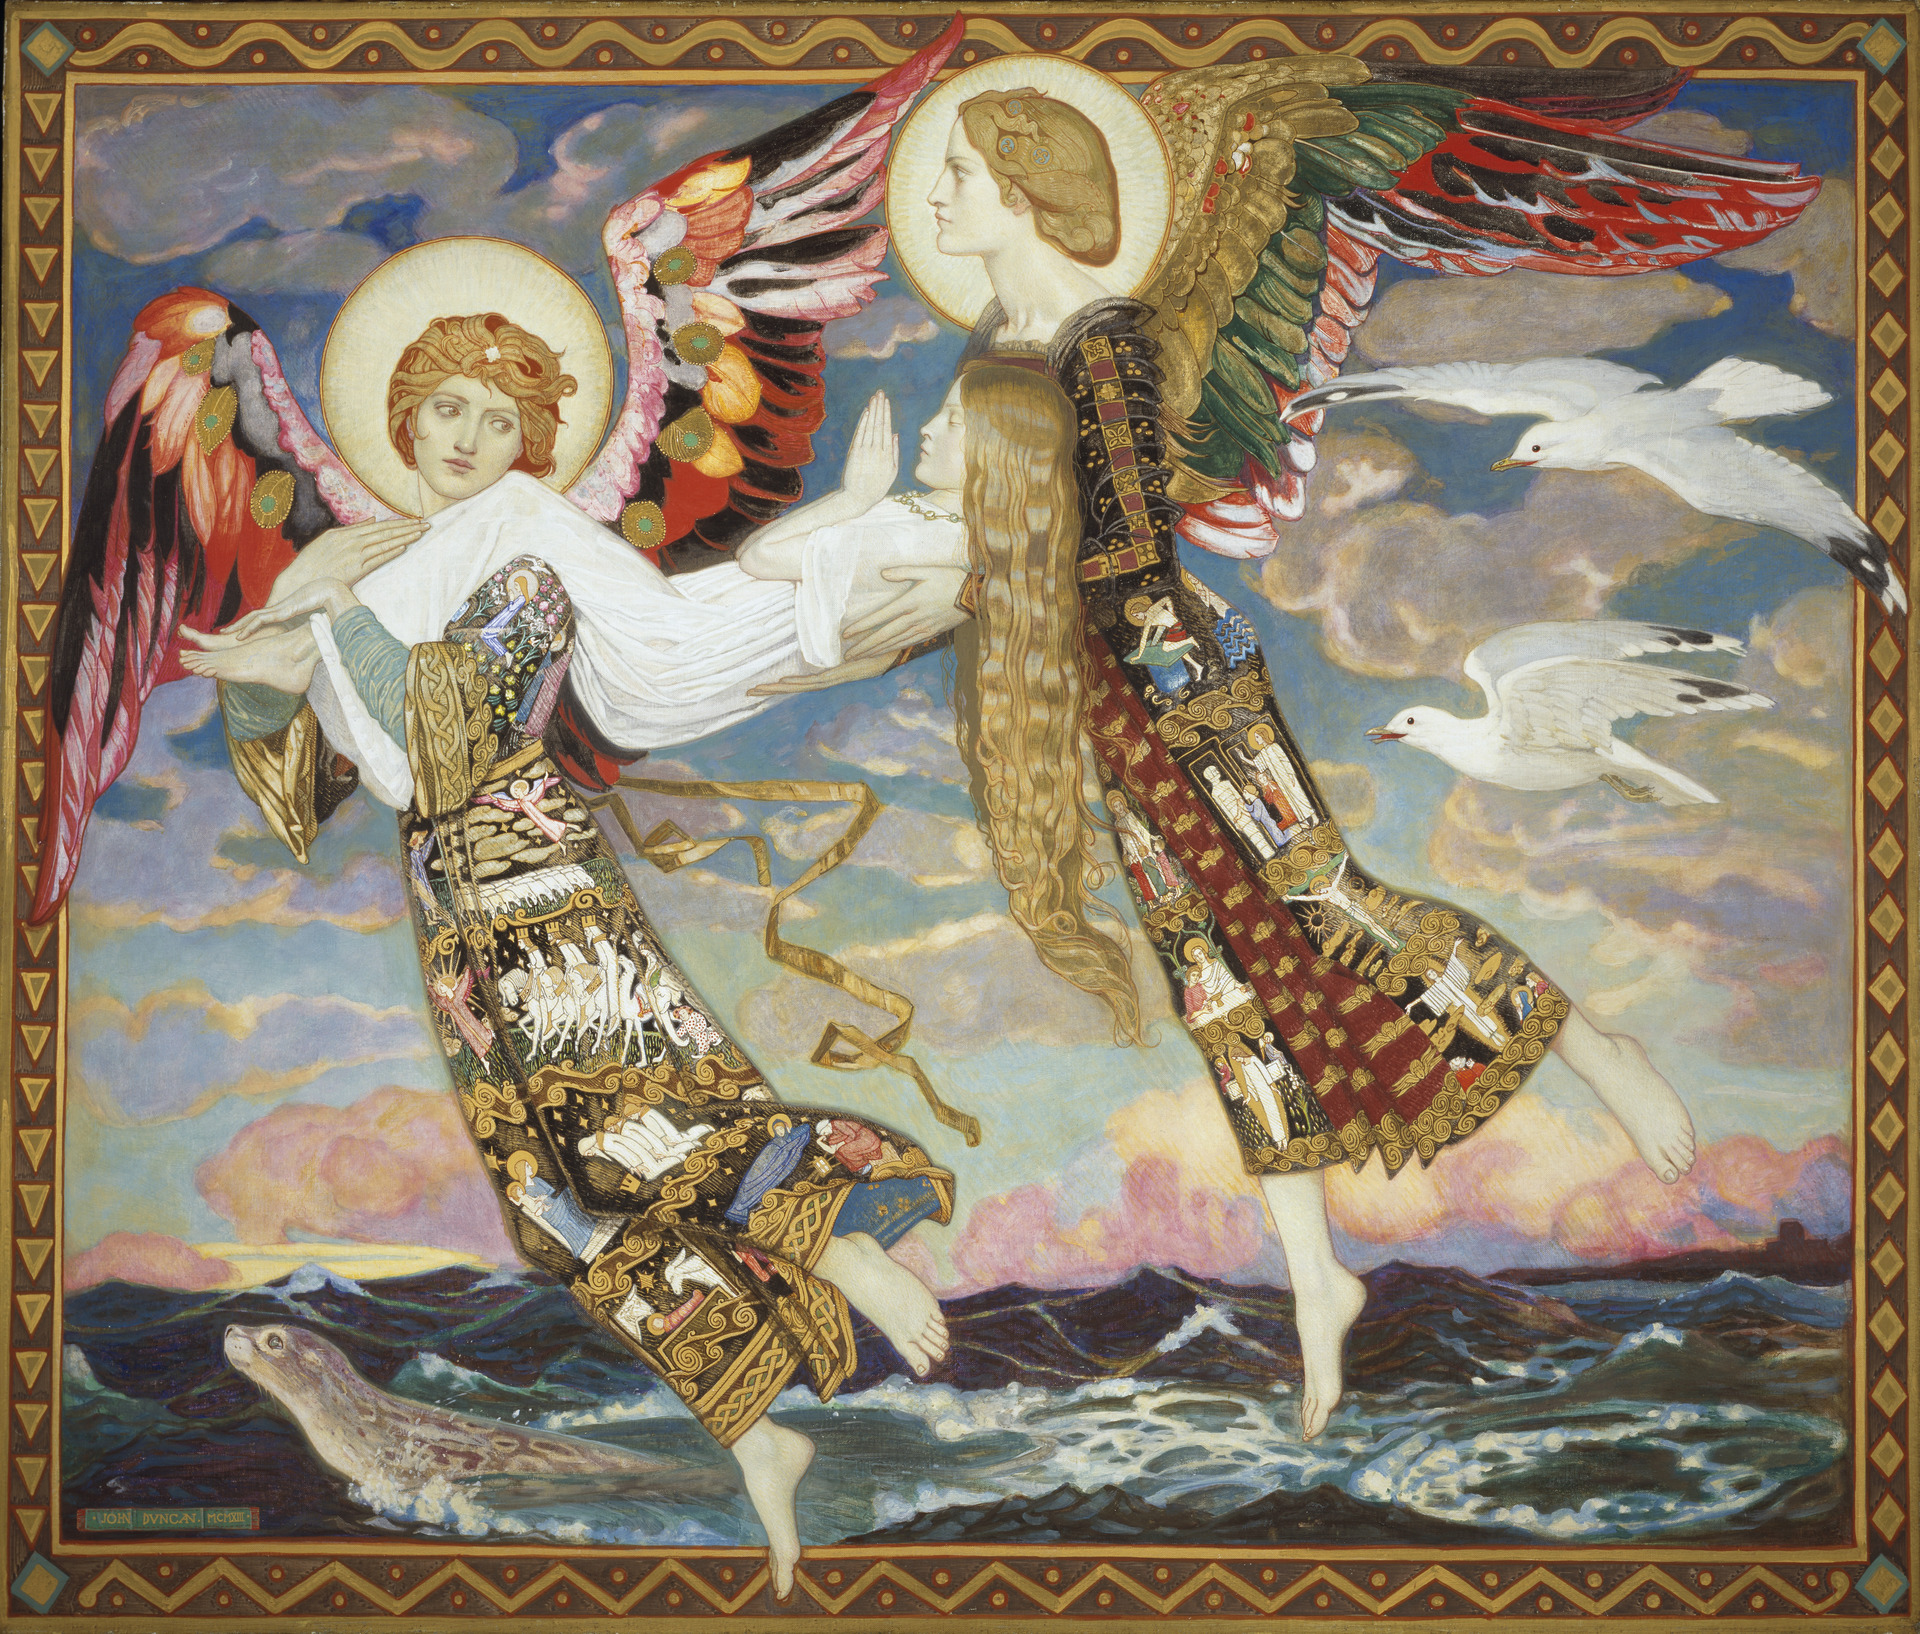 Two angels with halos carrying a girl praying while flying above the ocean with a colourful sky